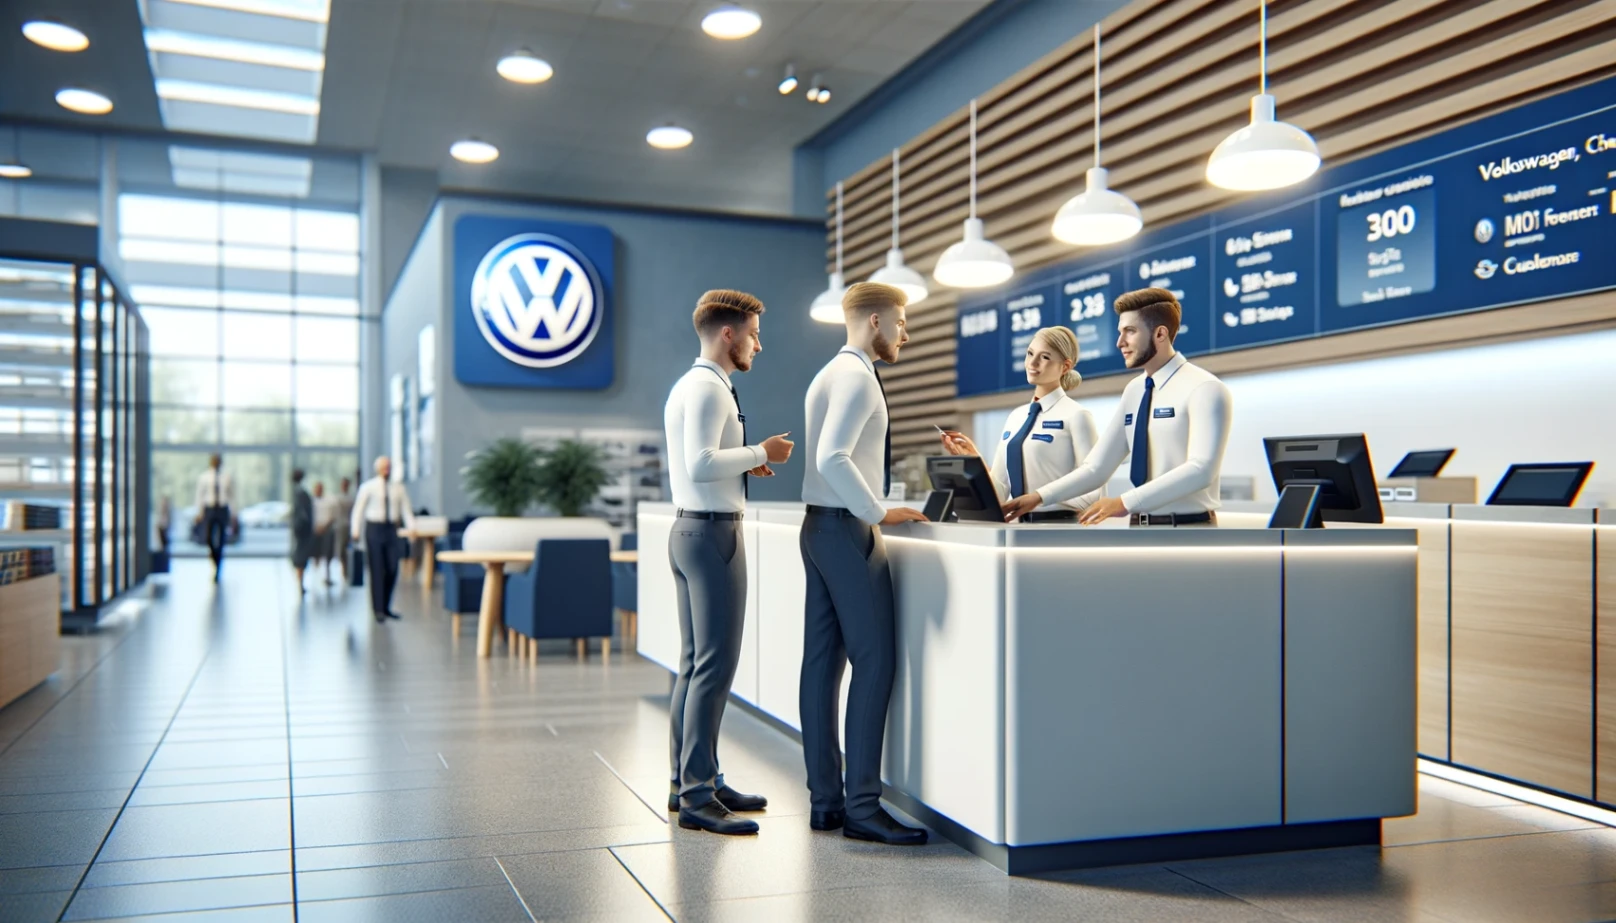 Opportunities at Volkswagen: Learn the Step-by-Step to Apply